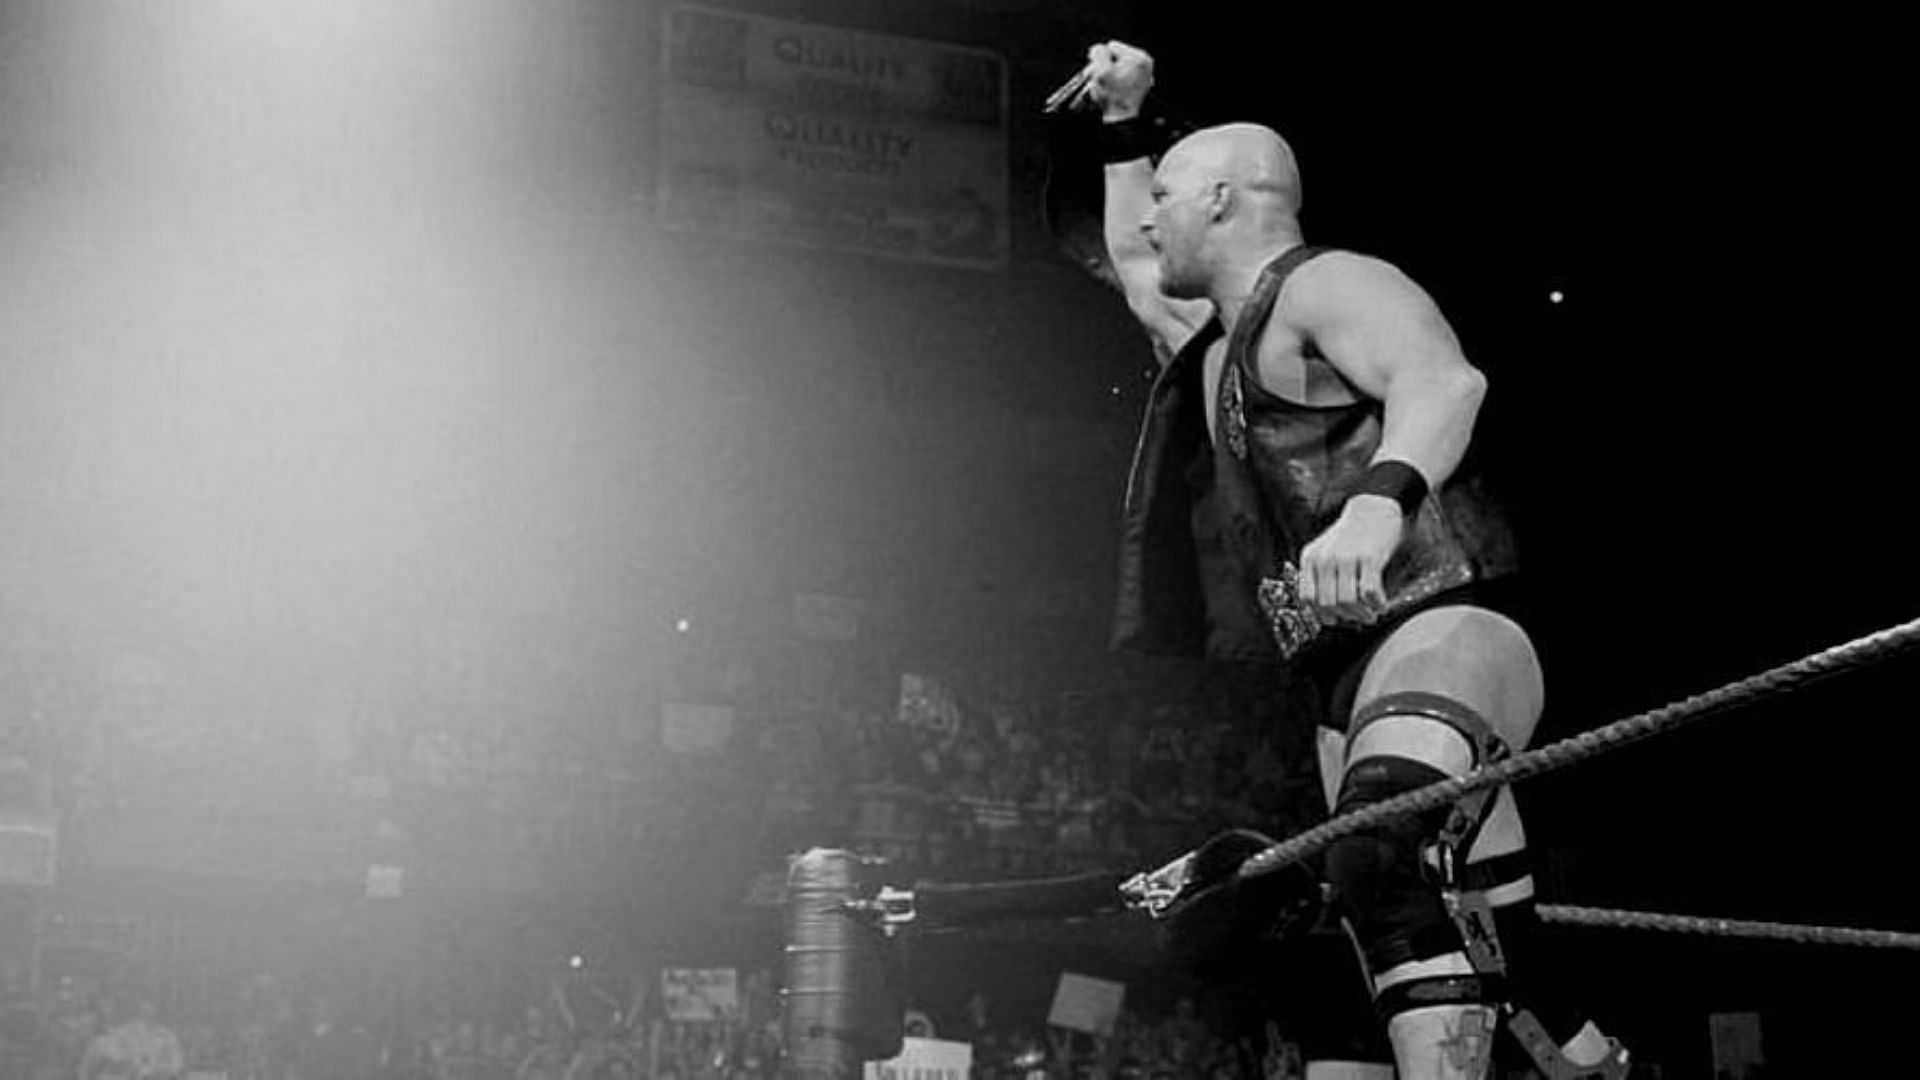 The rise of Stone Cold Steve Austin was a one-in-a-million phenomenon